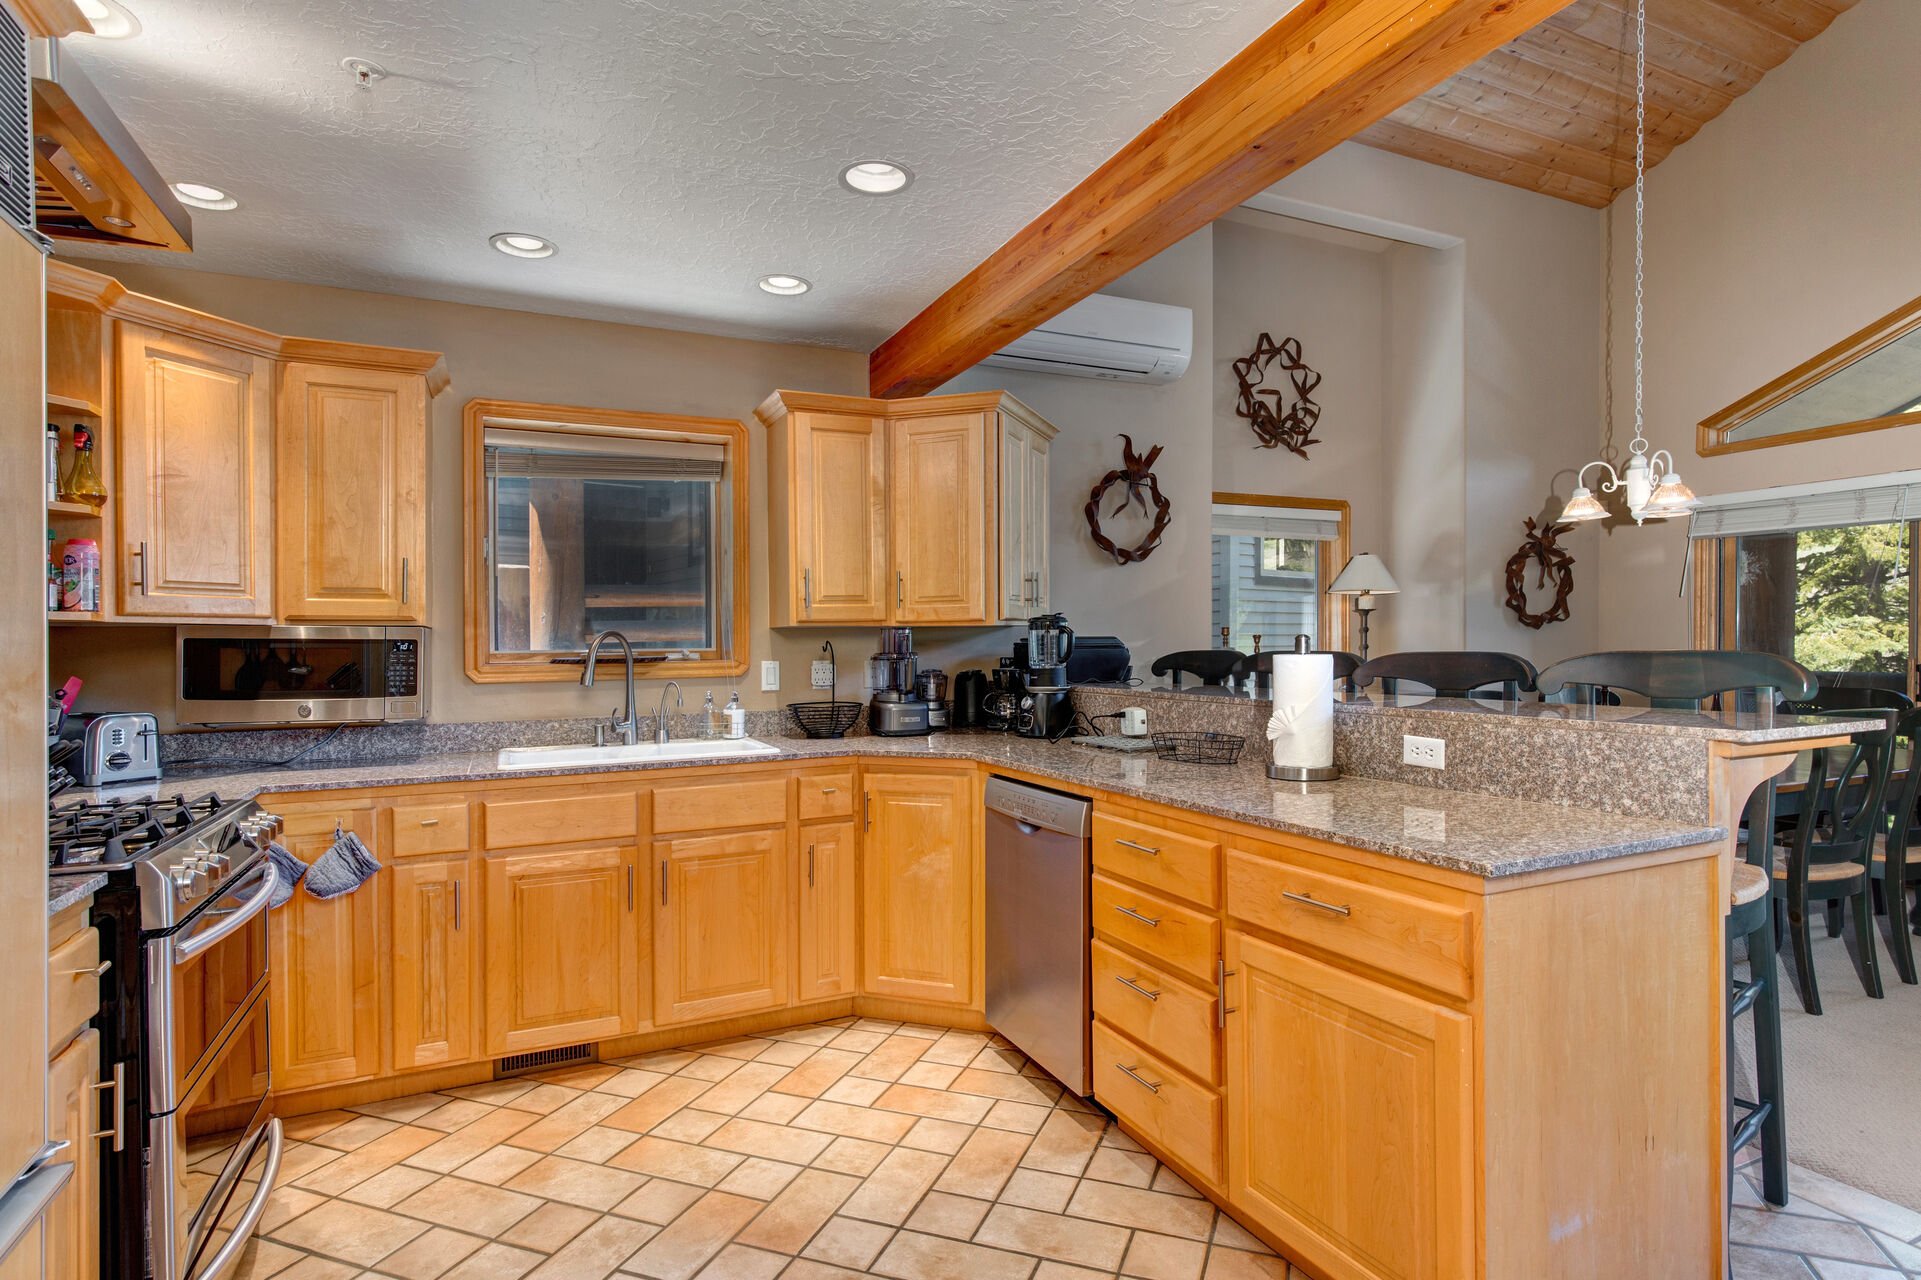 Fully Equipped Kitchen with stainless steel LG appliances, and bar seating for four